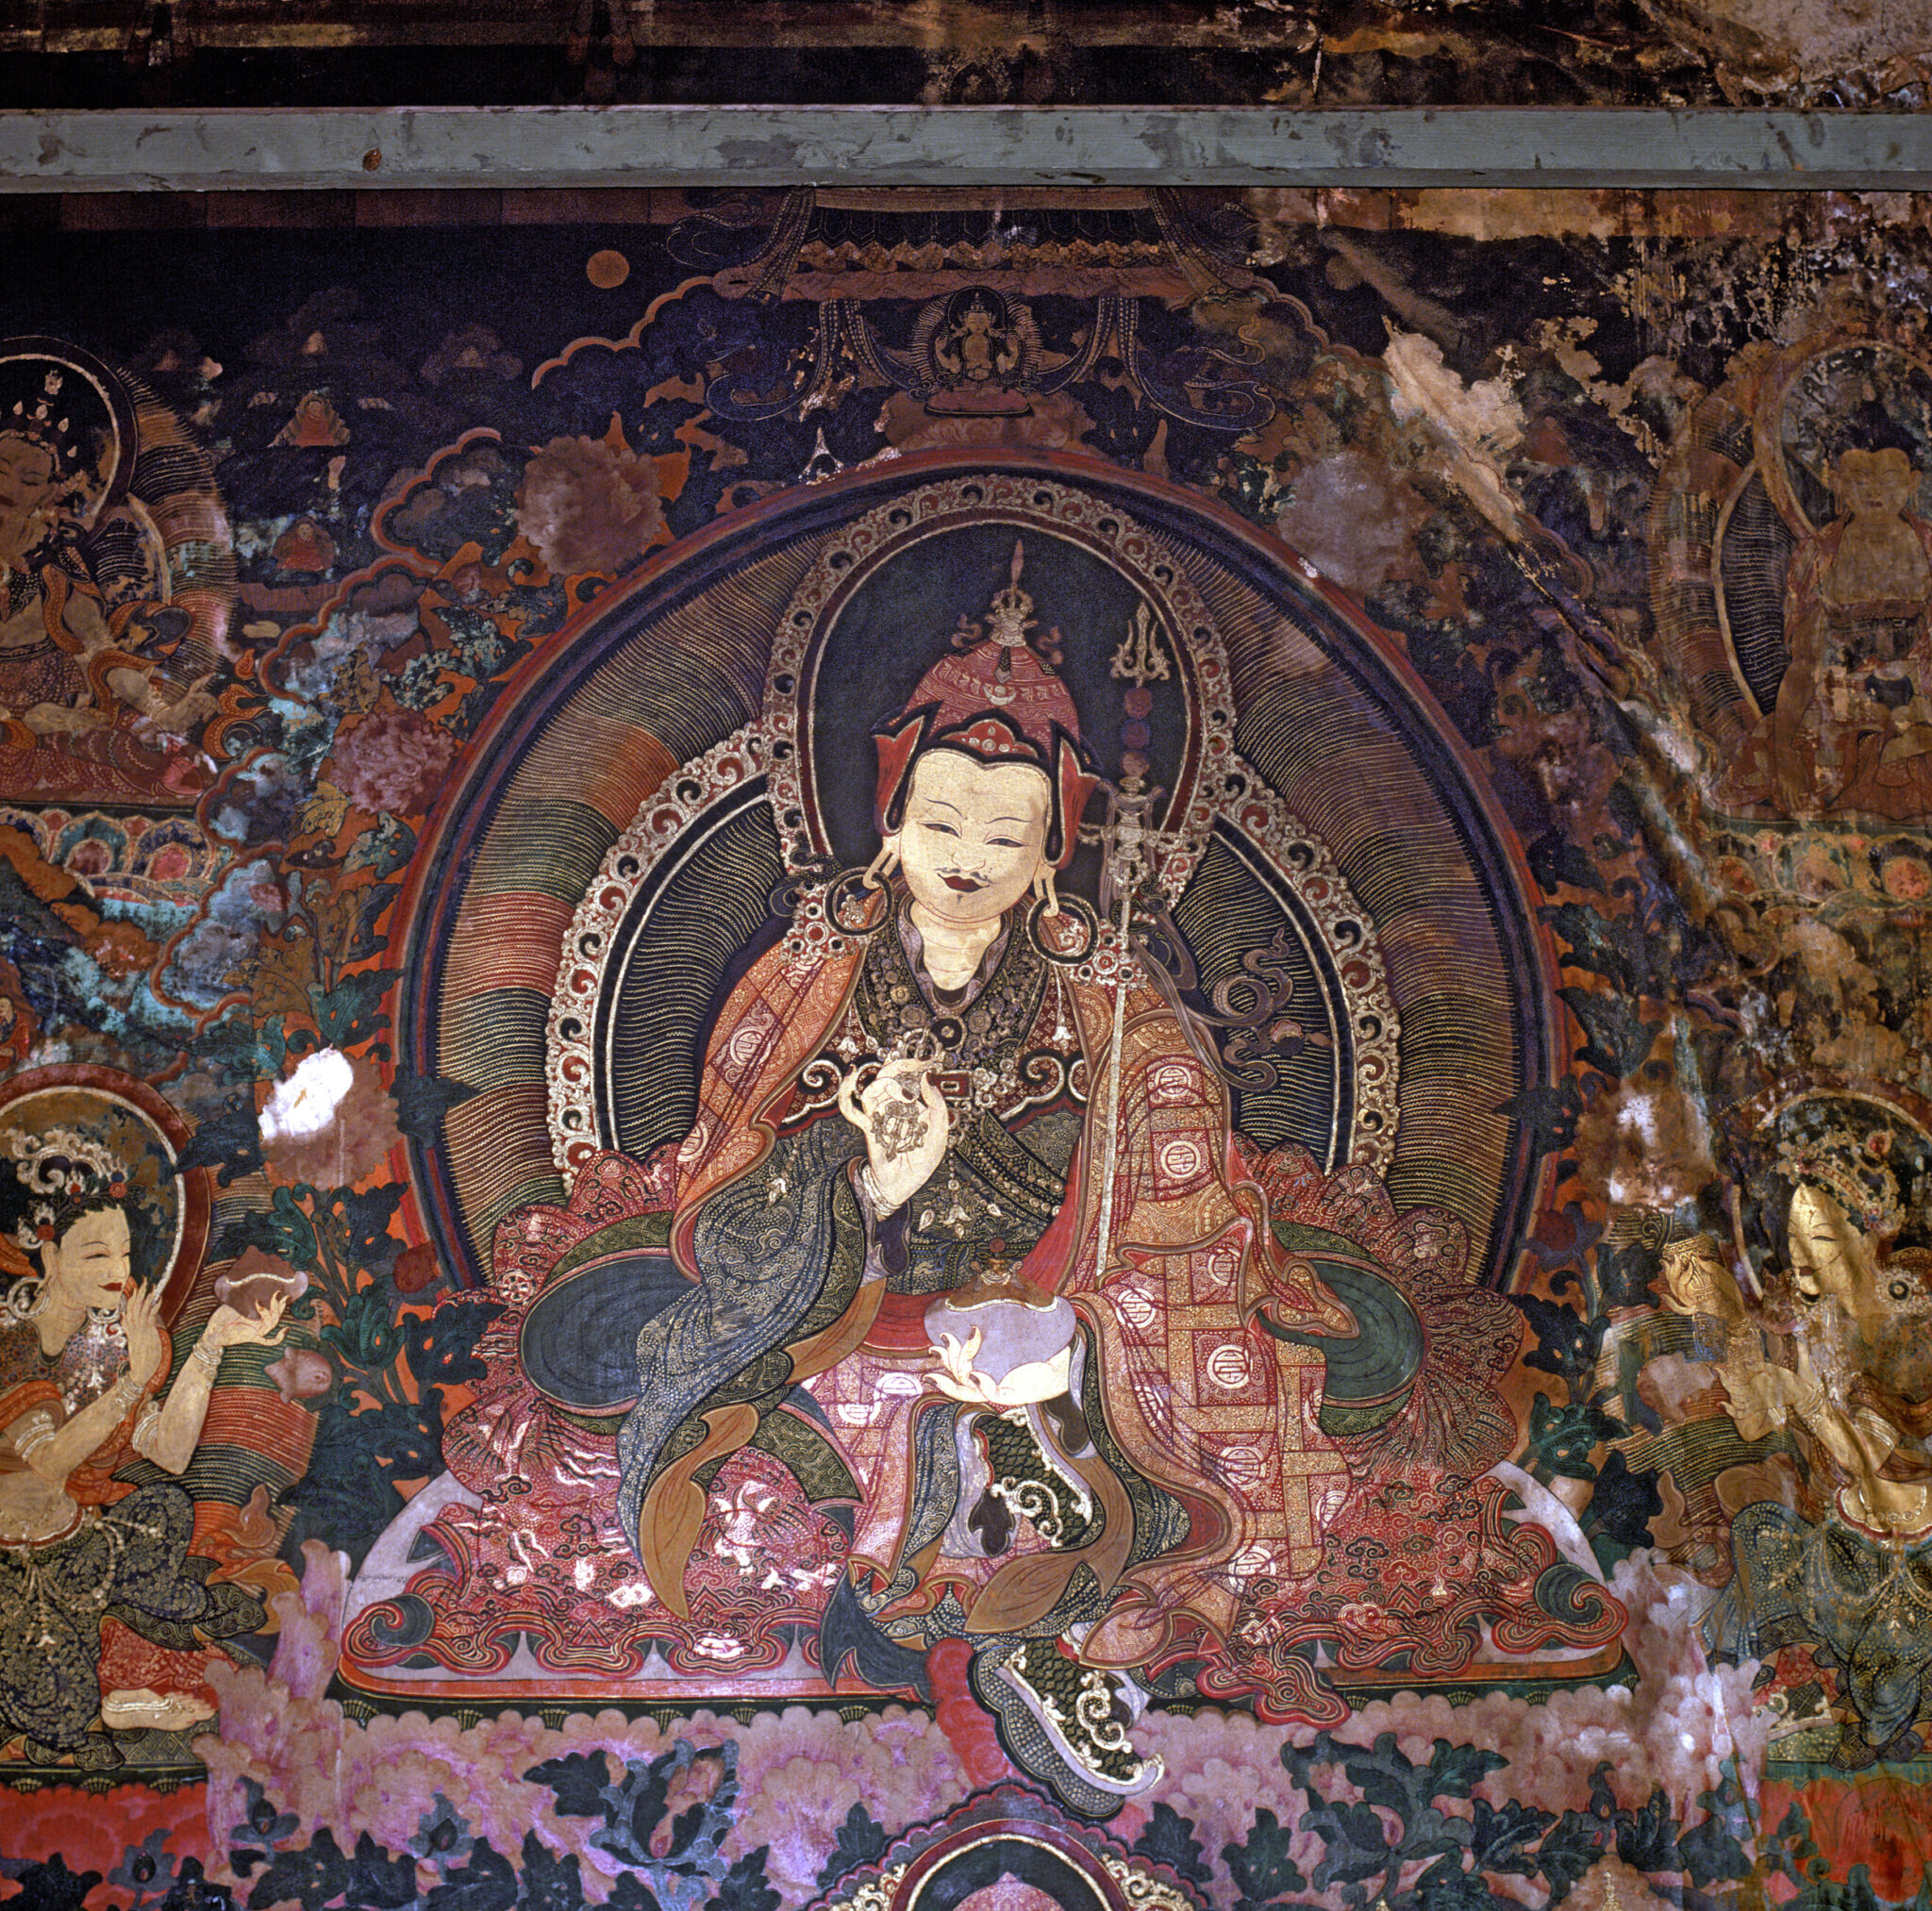 Guru wearing patchwork robe with staff at right shoulder, bowl in right hand, and vajra in left